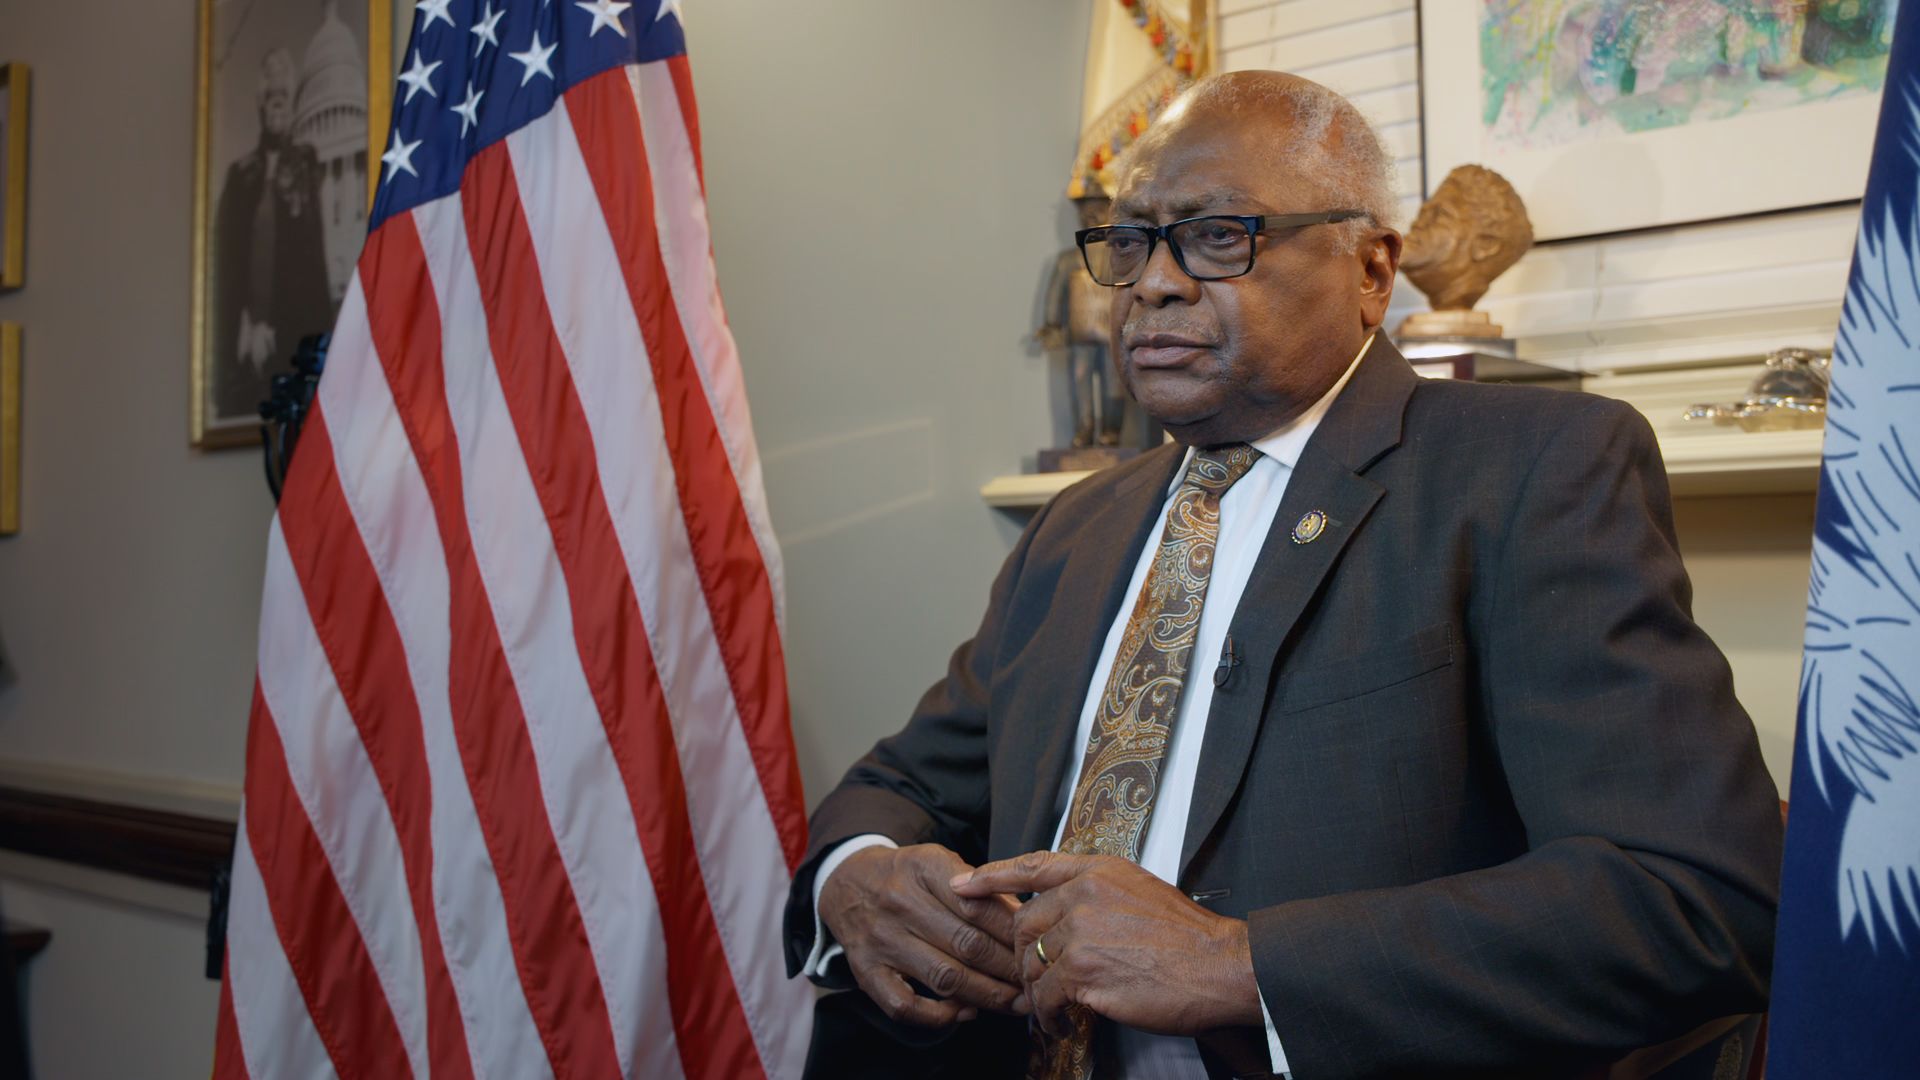 Rep. Jim Clyburn is seen speaking with 